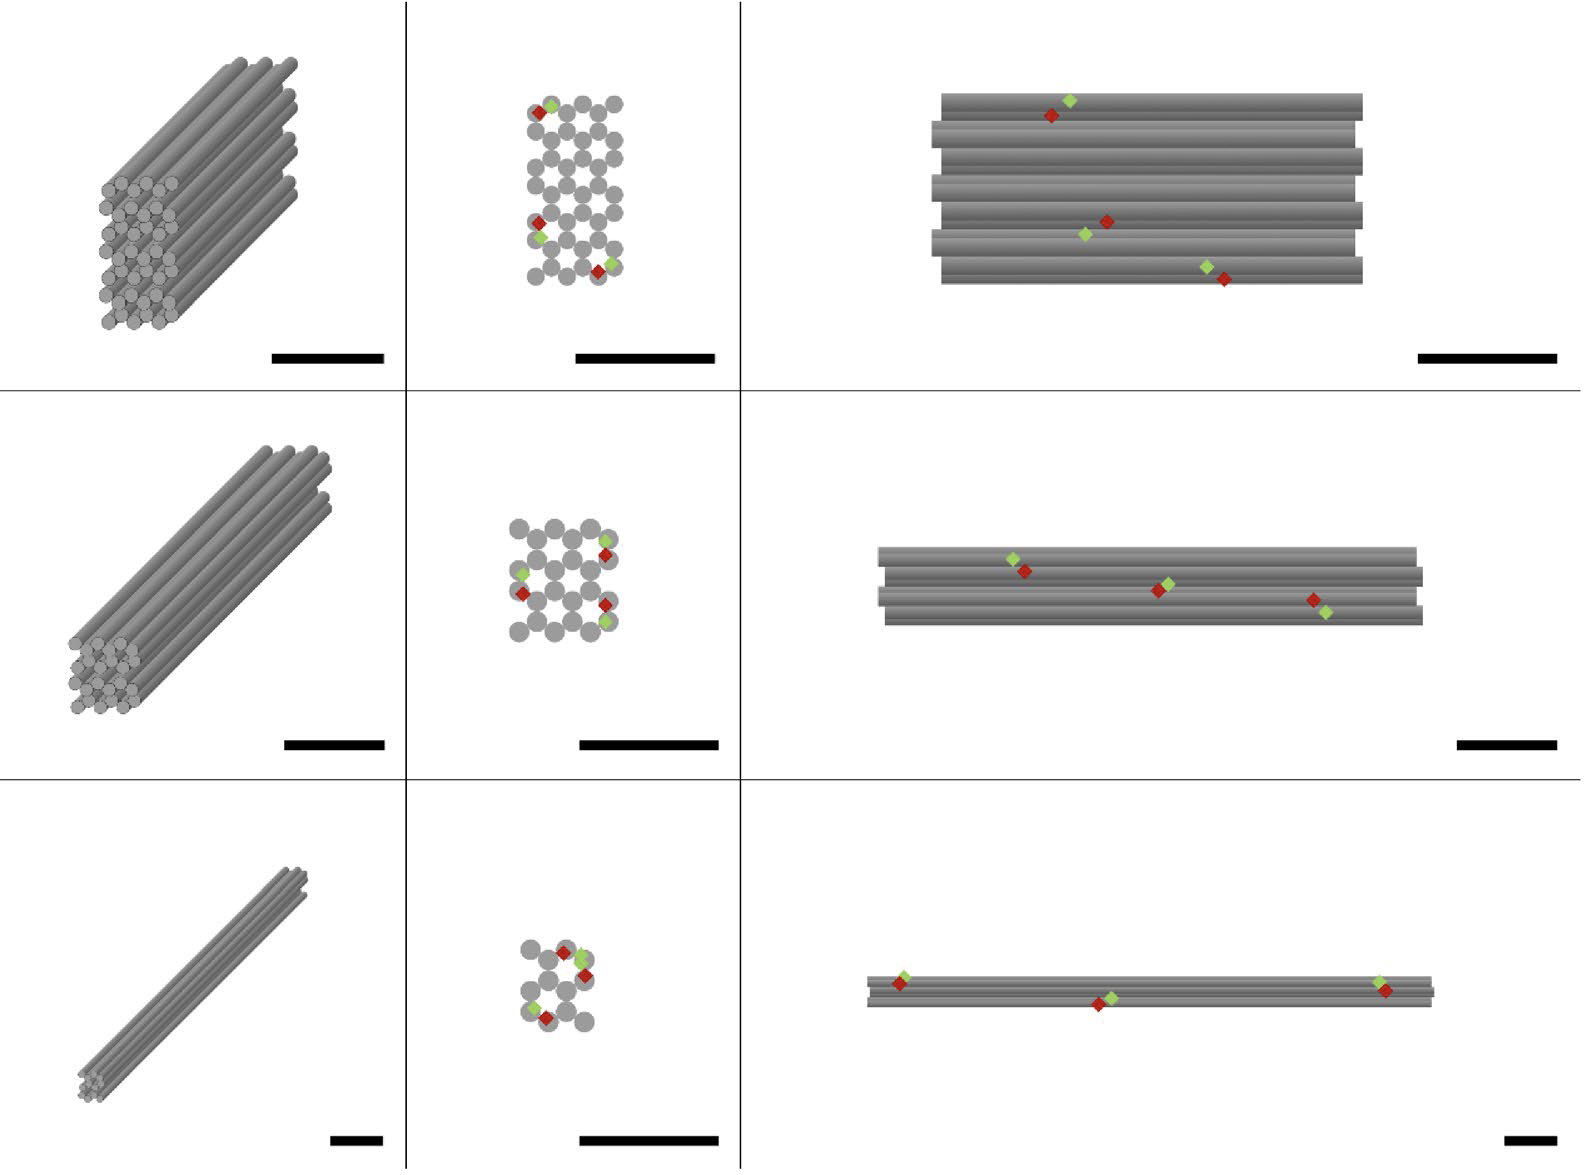 Structural characterization of the DNA origami nanostructures and quality assessment of their assembly